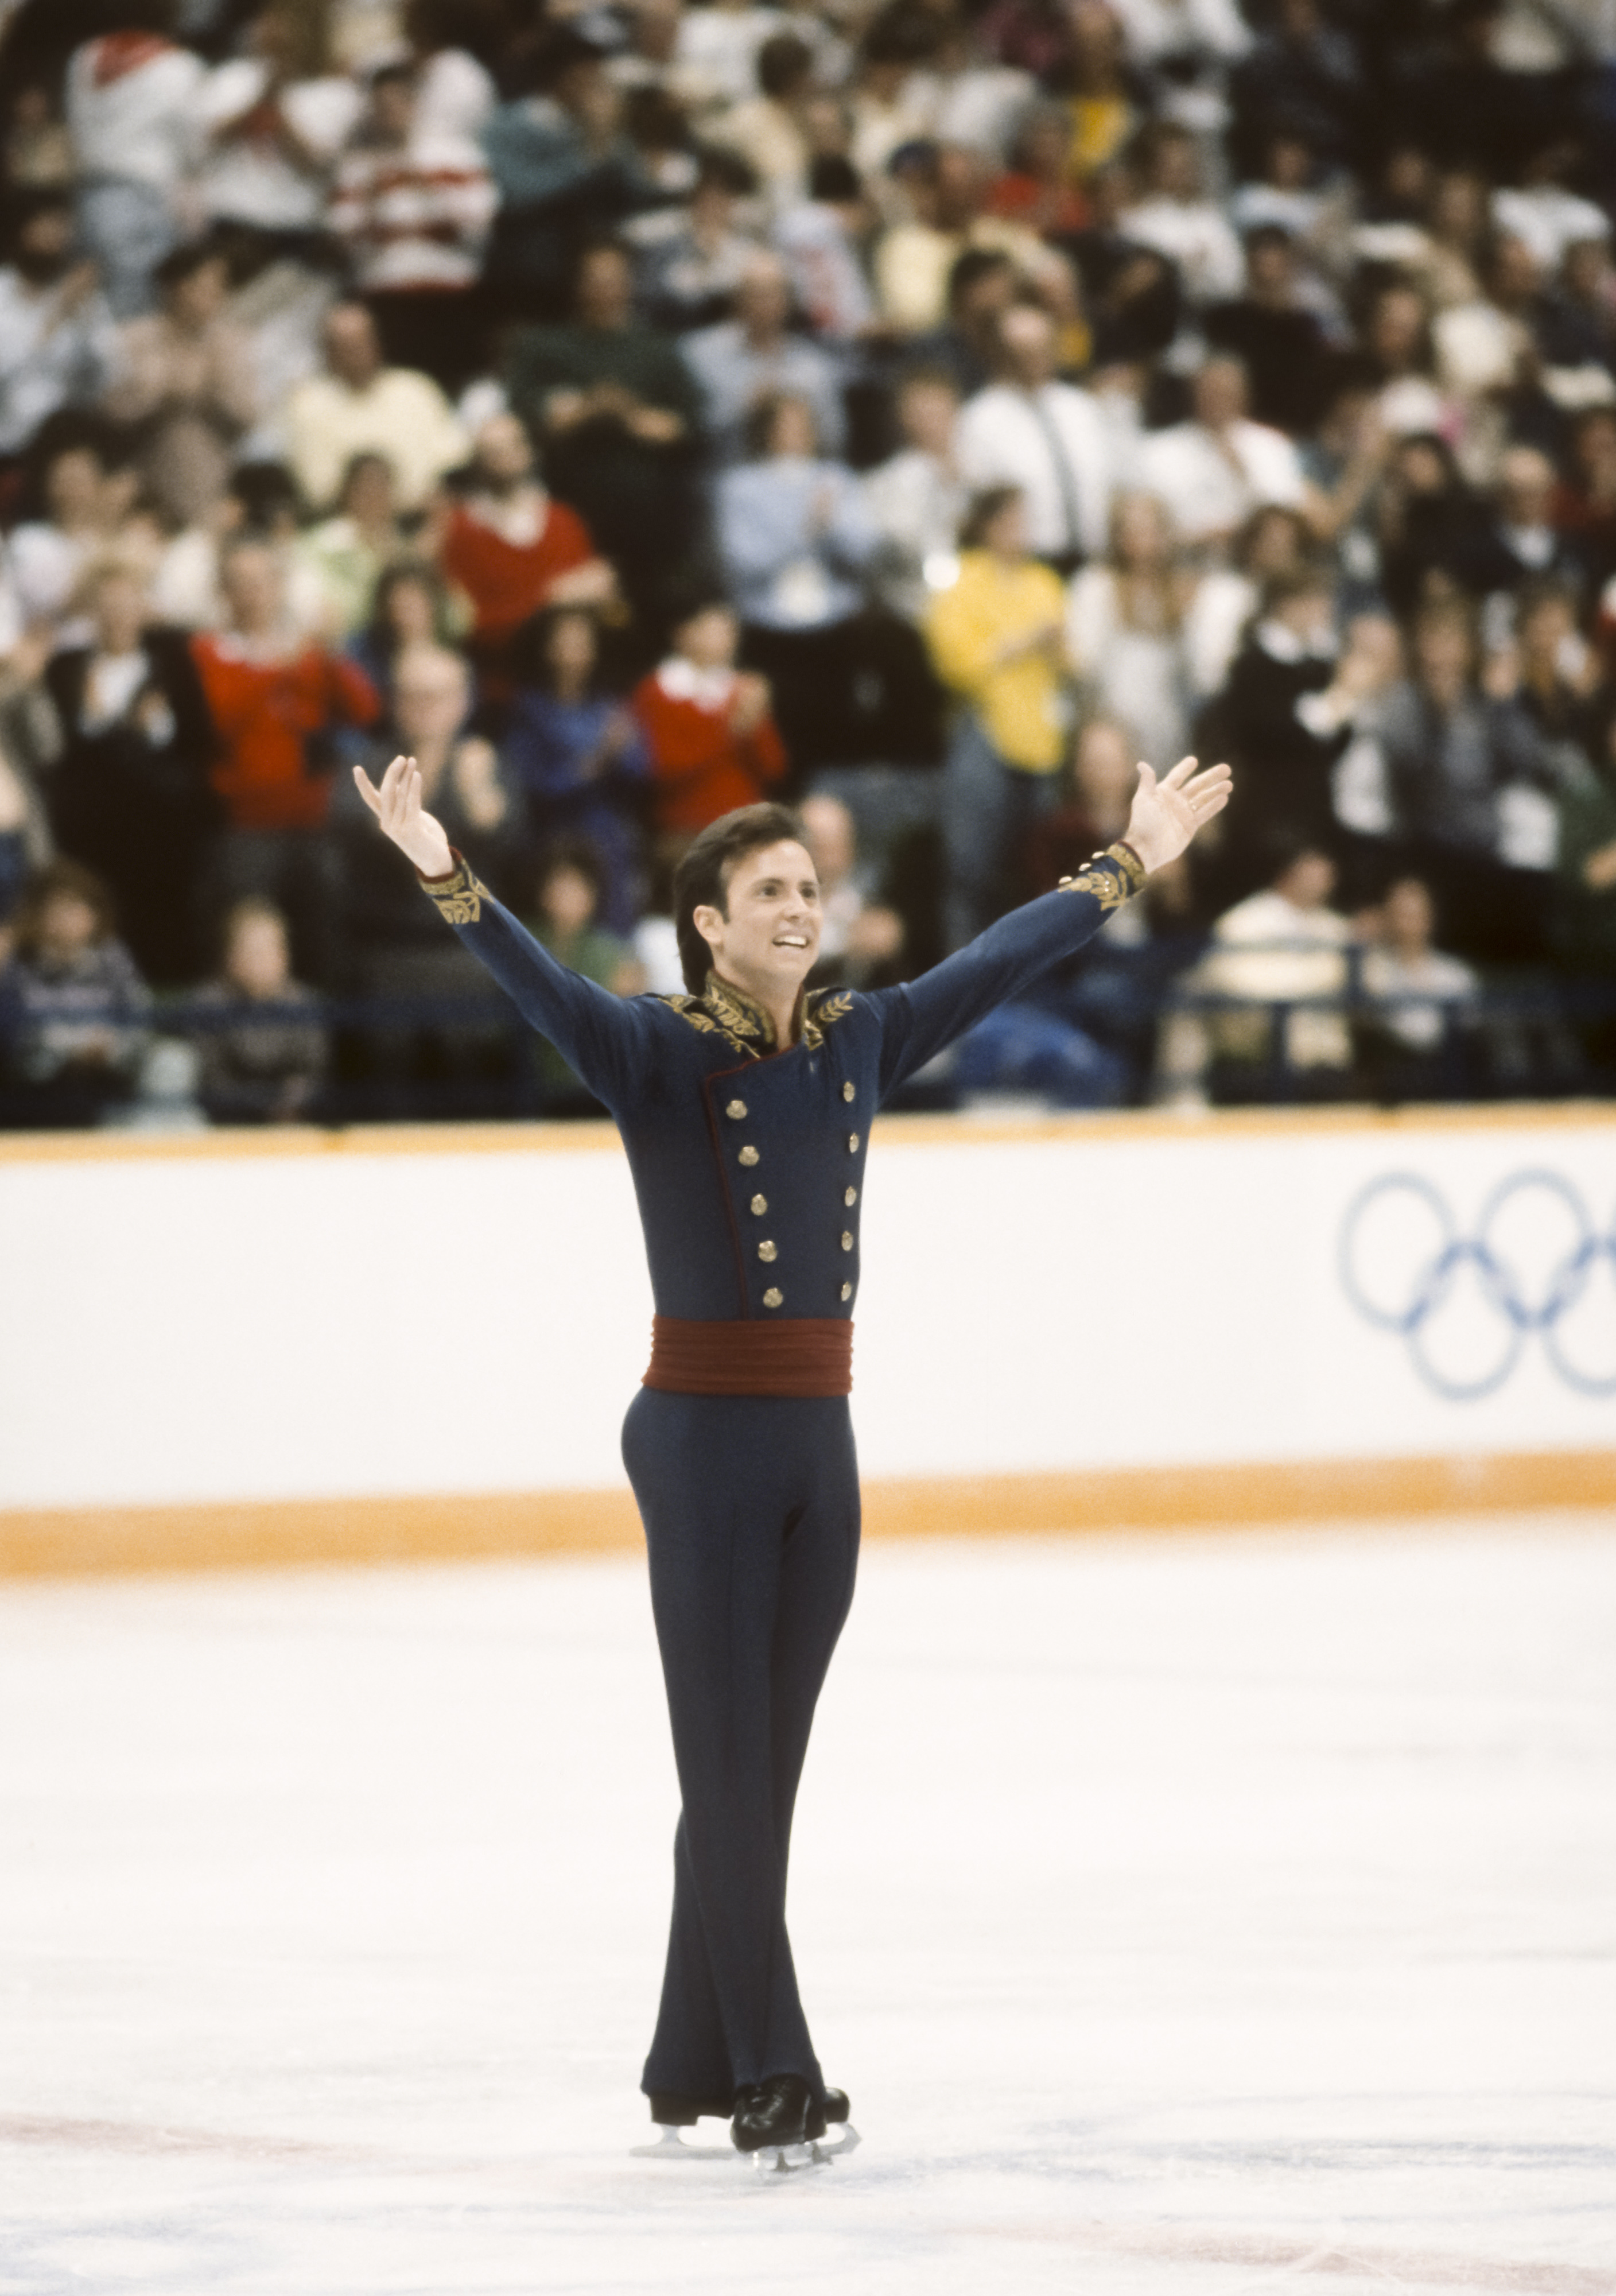 This is a photo of U.S. figure skater Brian Boitano at the 1988 Winter Olympics in Calgary.